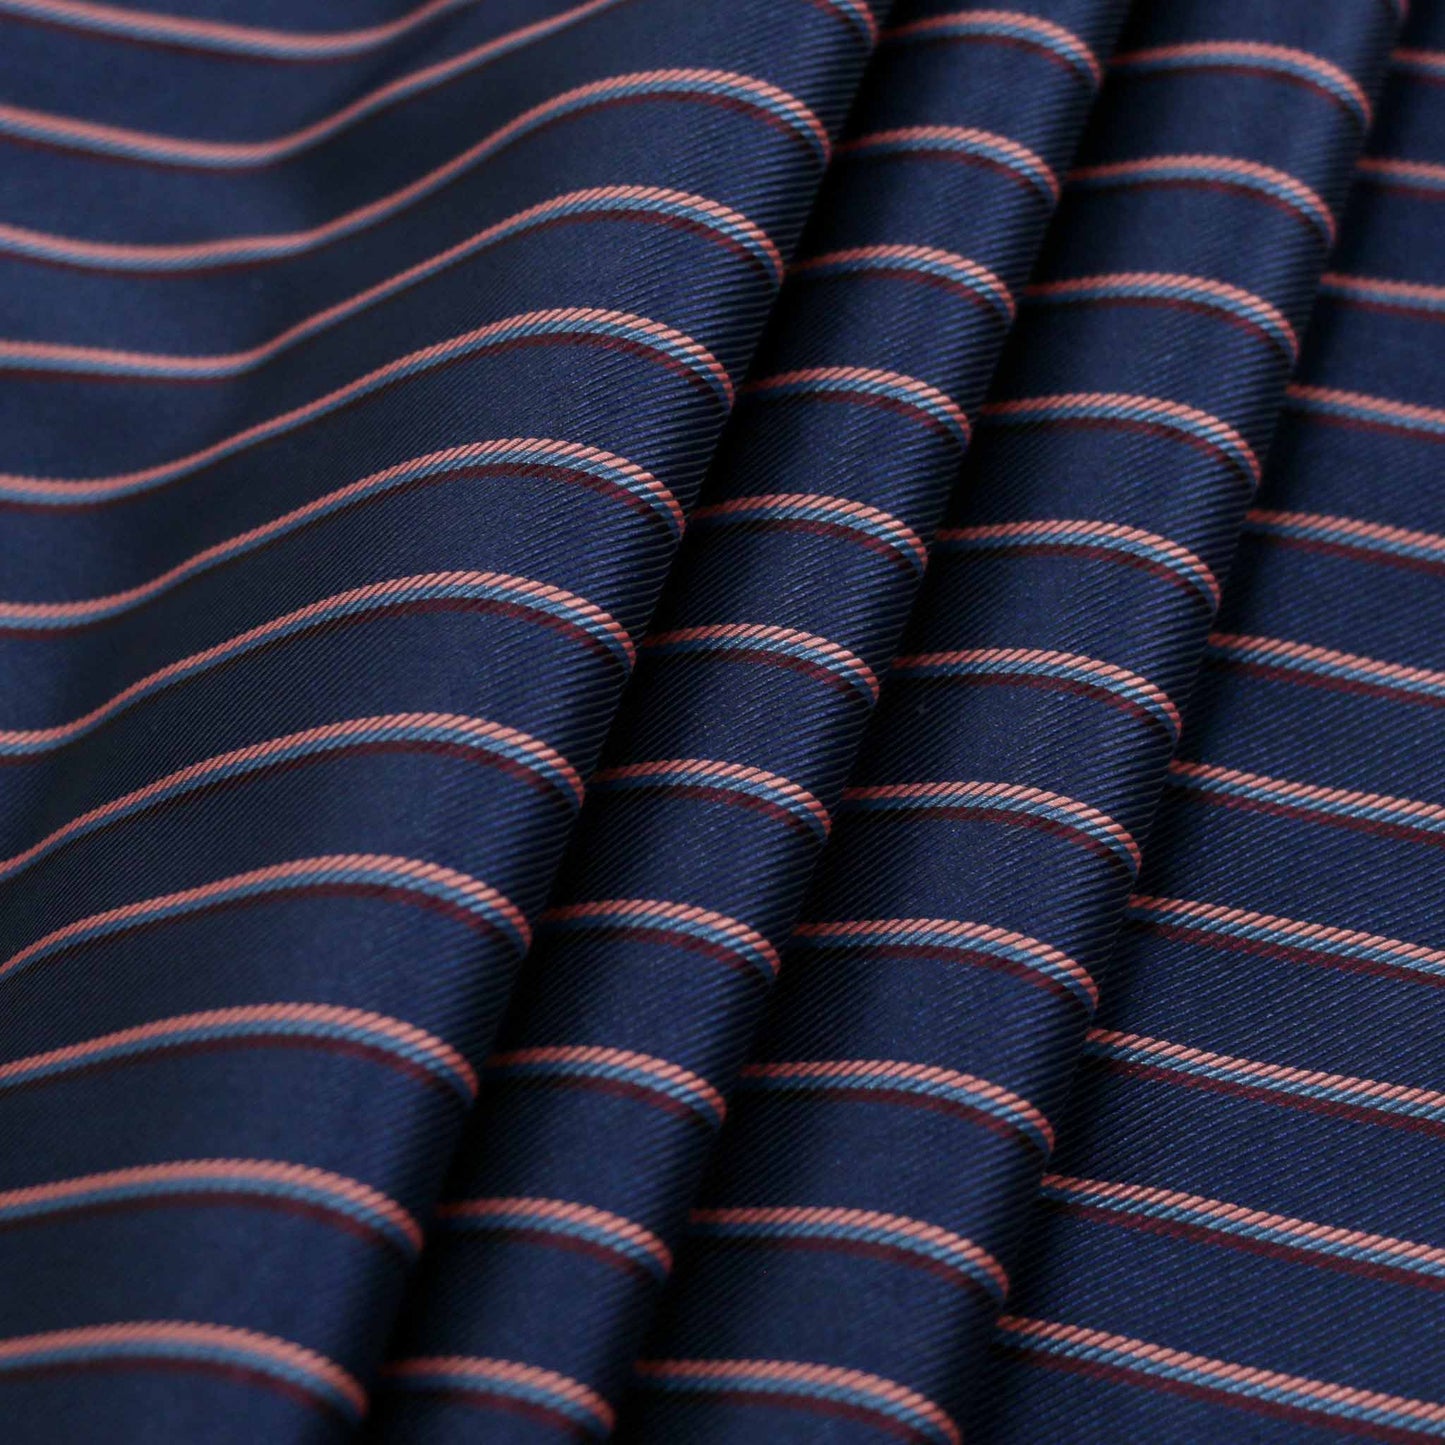 navy twill viscose lining dressmaking fabric with pink and maroon pinstripe design